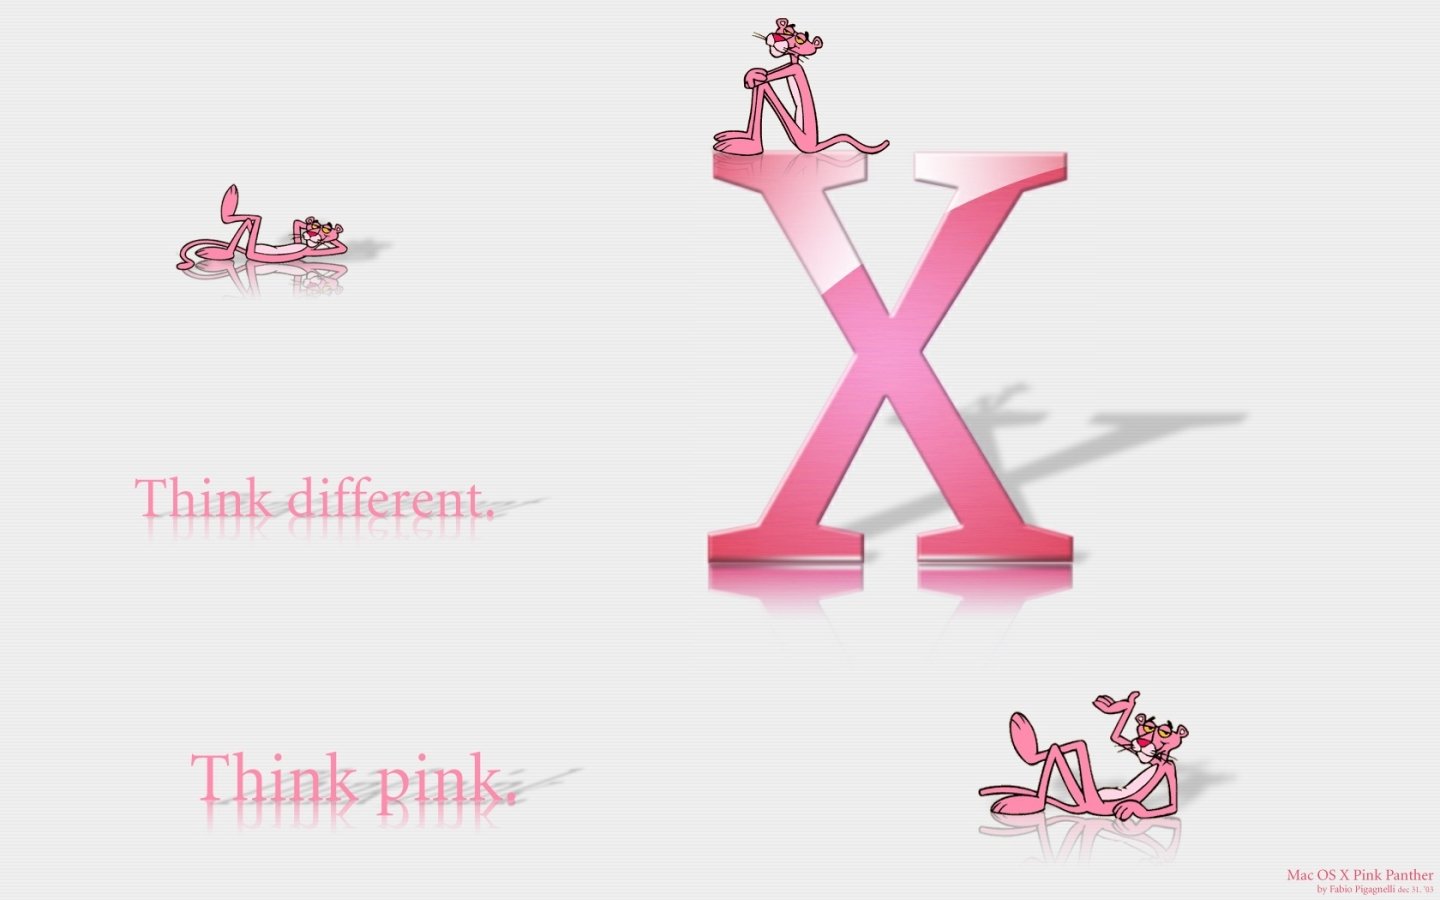 pink panther Wallpaper and Background 1440x900 ID470603